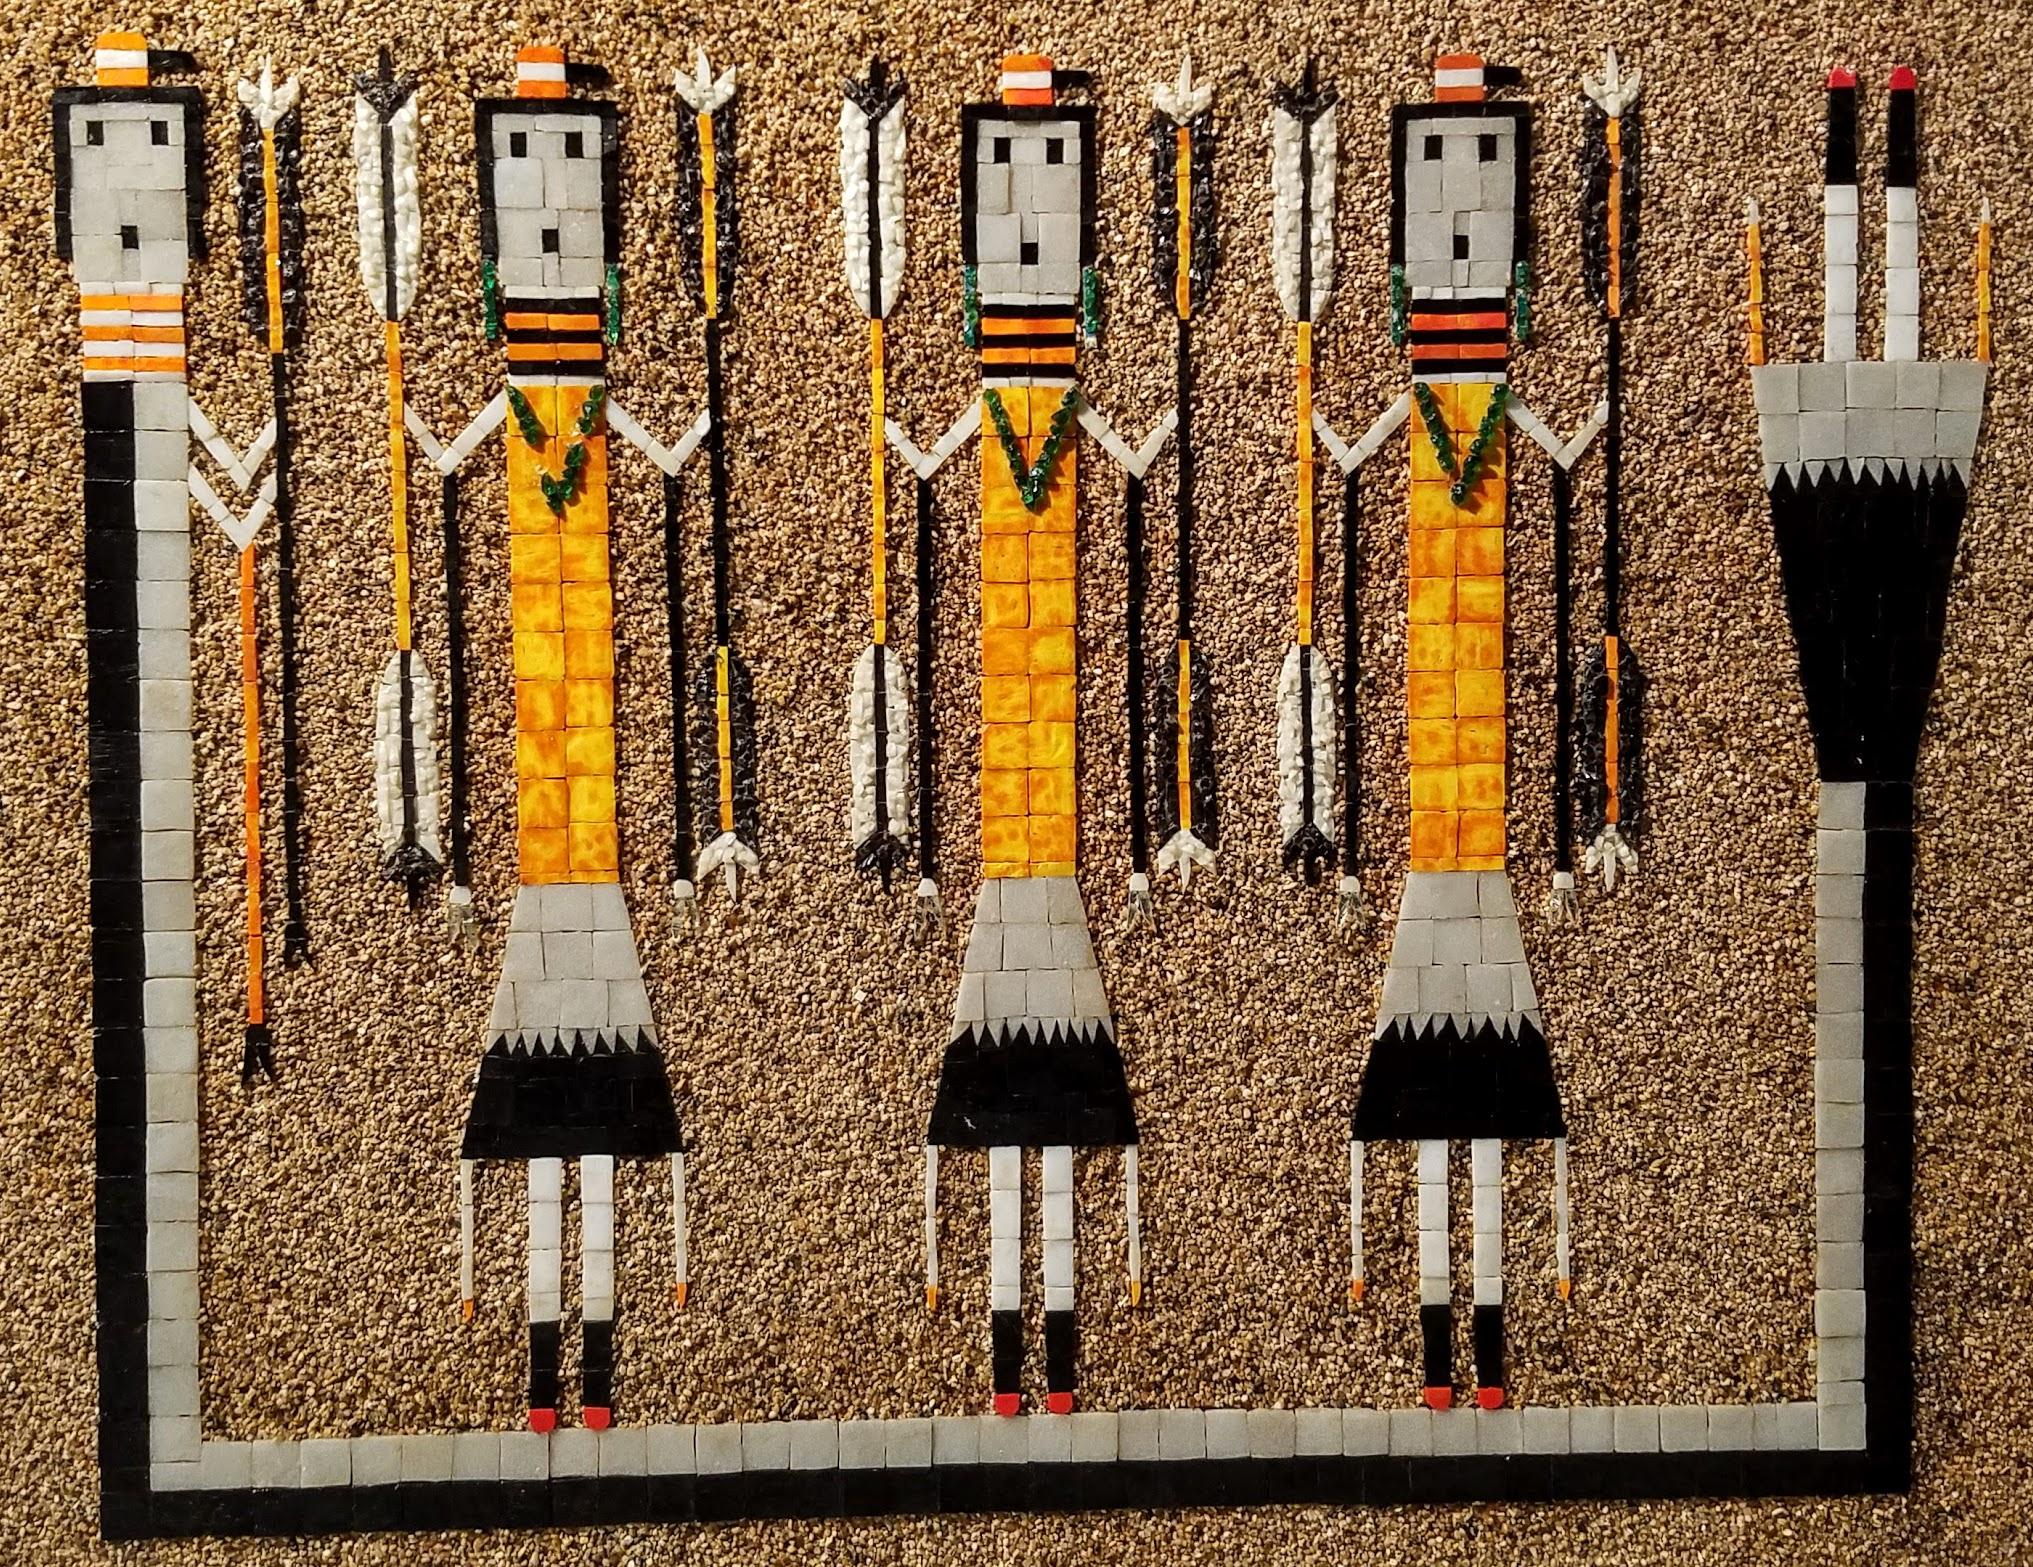 A Navajo sand painting mosaic art wall panel of the Navajo mythological Yei Dancers Rainbow Guardians created in the 1960s in a non traditional format from a studio in Tehachapi. California.
The artist has created a boldly colored image isolated on